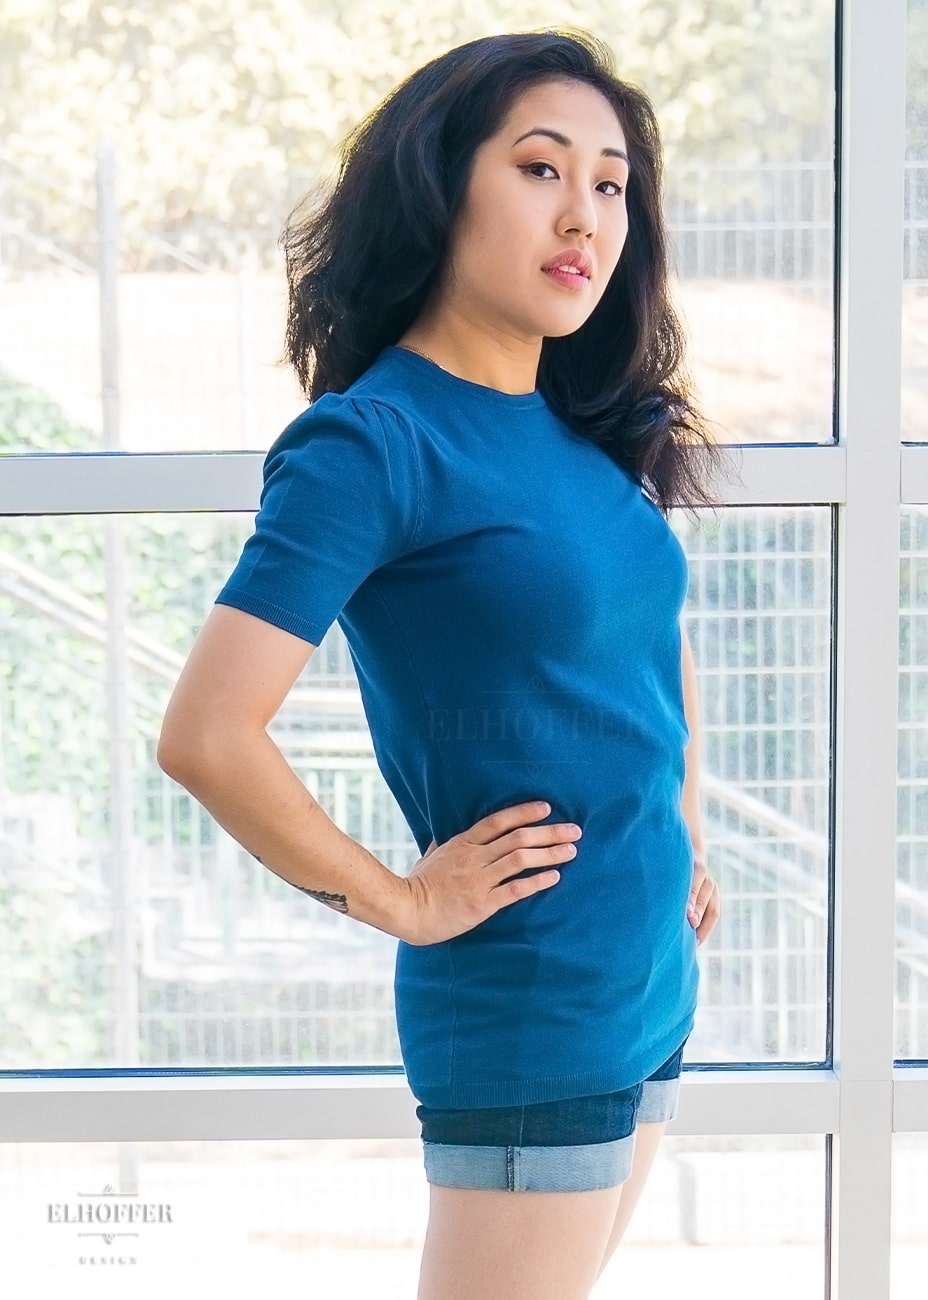 Kate, an olive skinned XS model with long dark hair, is wearing a blue knit short sleeve tee style top. The top has a high round neckline and the hem of the top falls to the hips. The shoulders are slightly gathered.